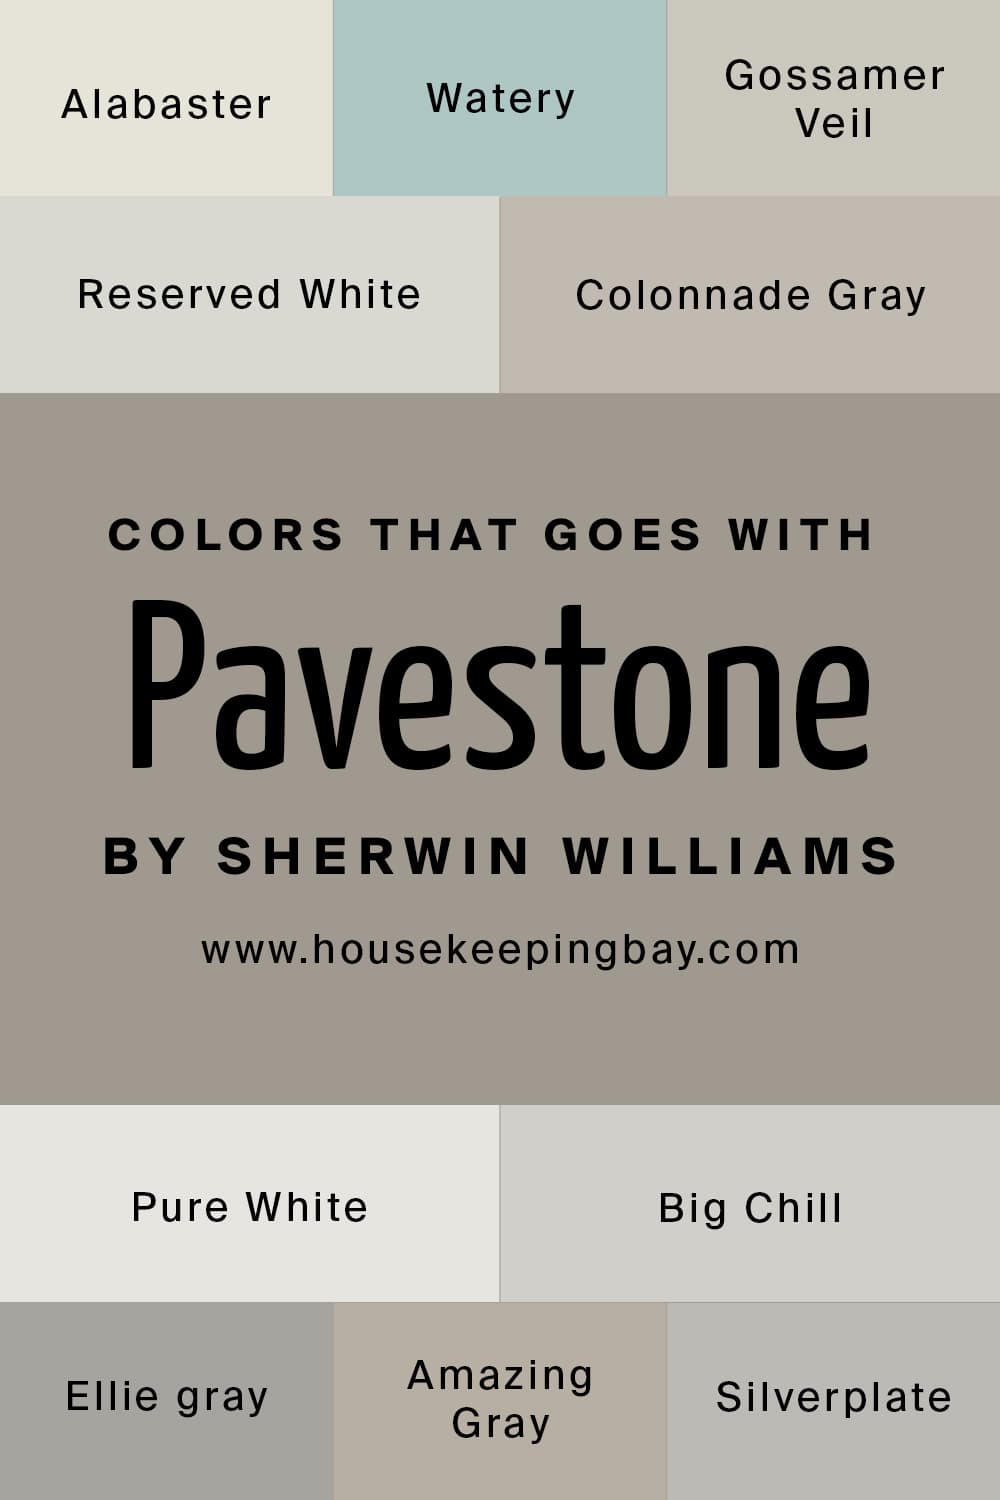 Colors that goes with Pavestone by Sherwin Williams